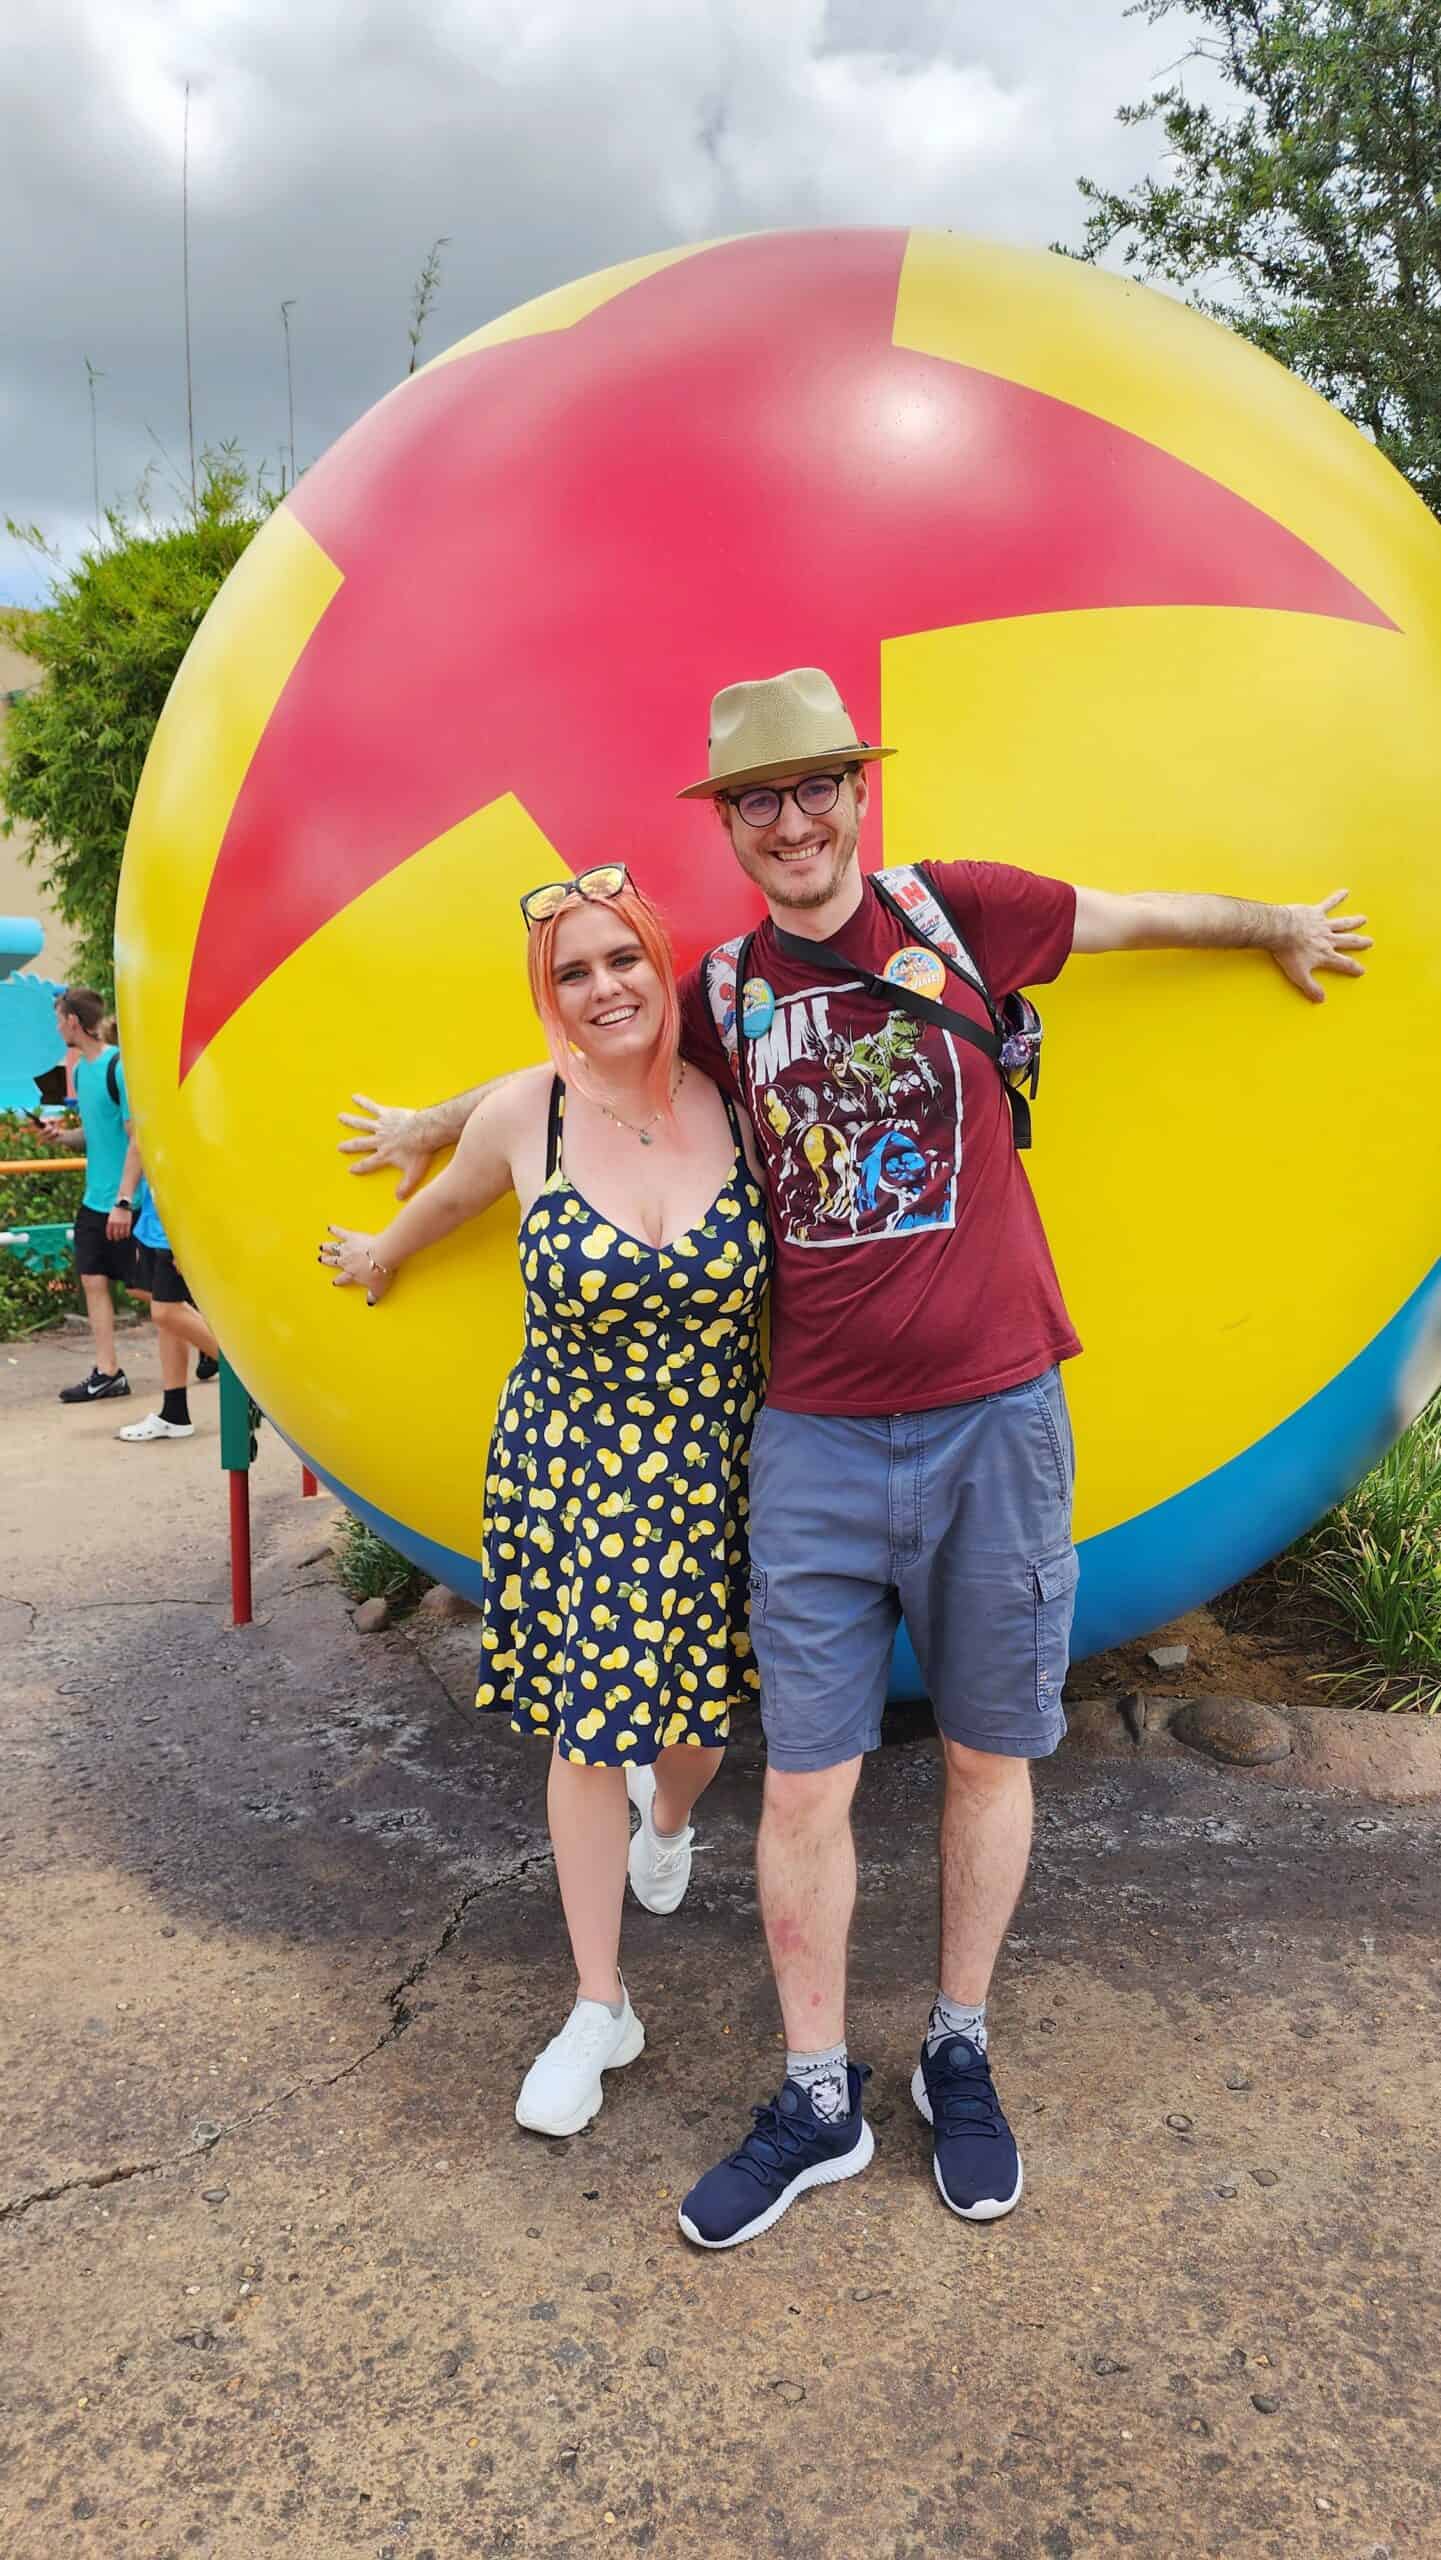 A woman and a man pretend to hold a giant ball sculpture on their backs.